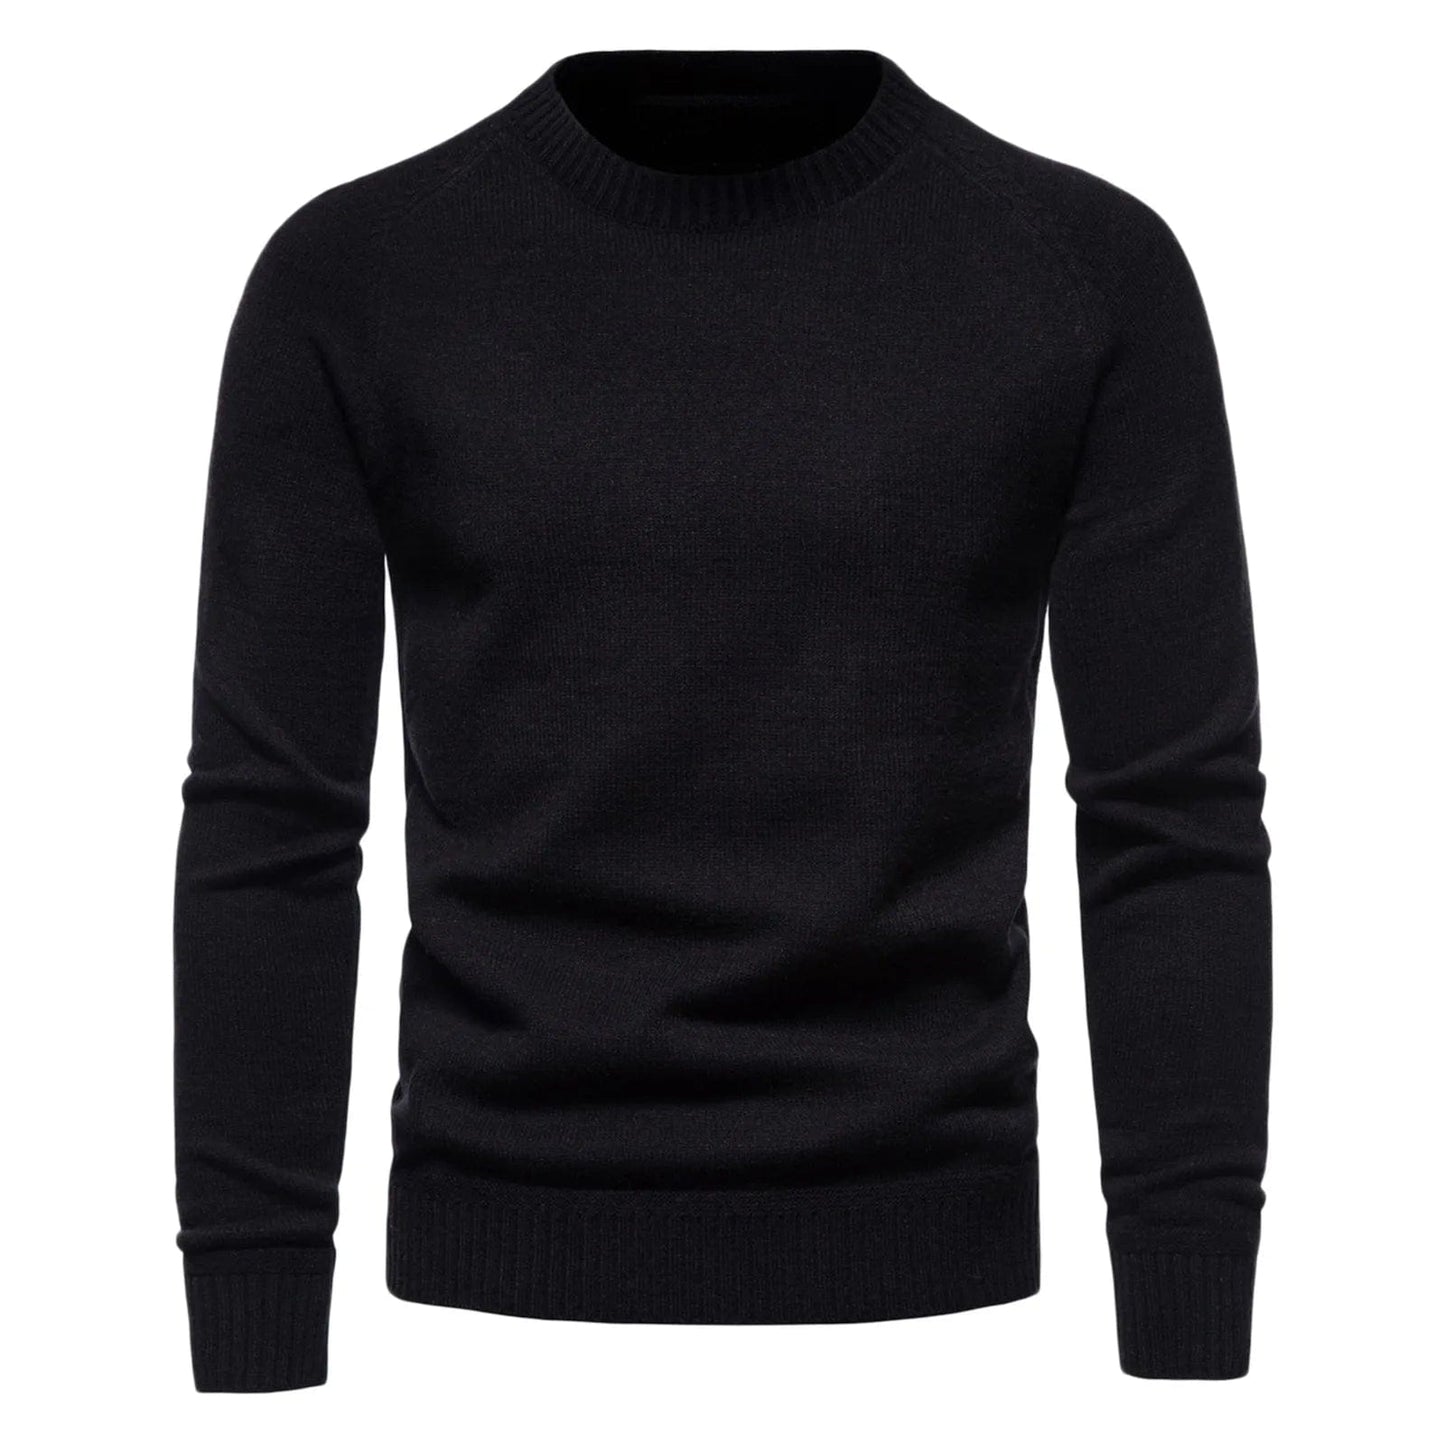 Men's Autumn And Winter Fashion Sweatshirt Patch Regular Edition Shoulder Sleeve Pullover Solid Color Sweater Tops